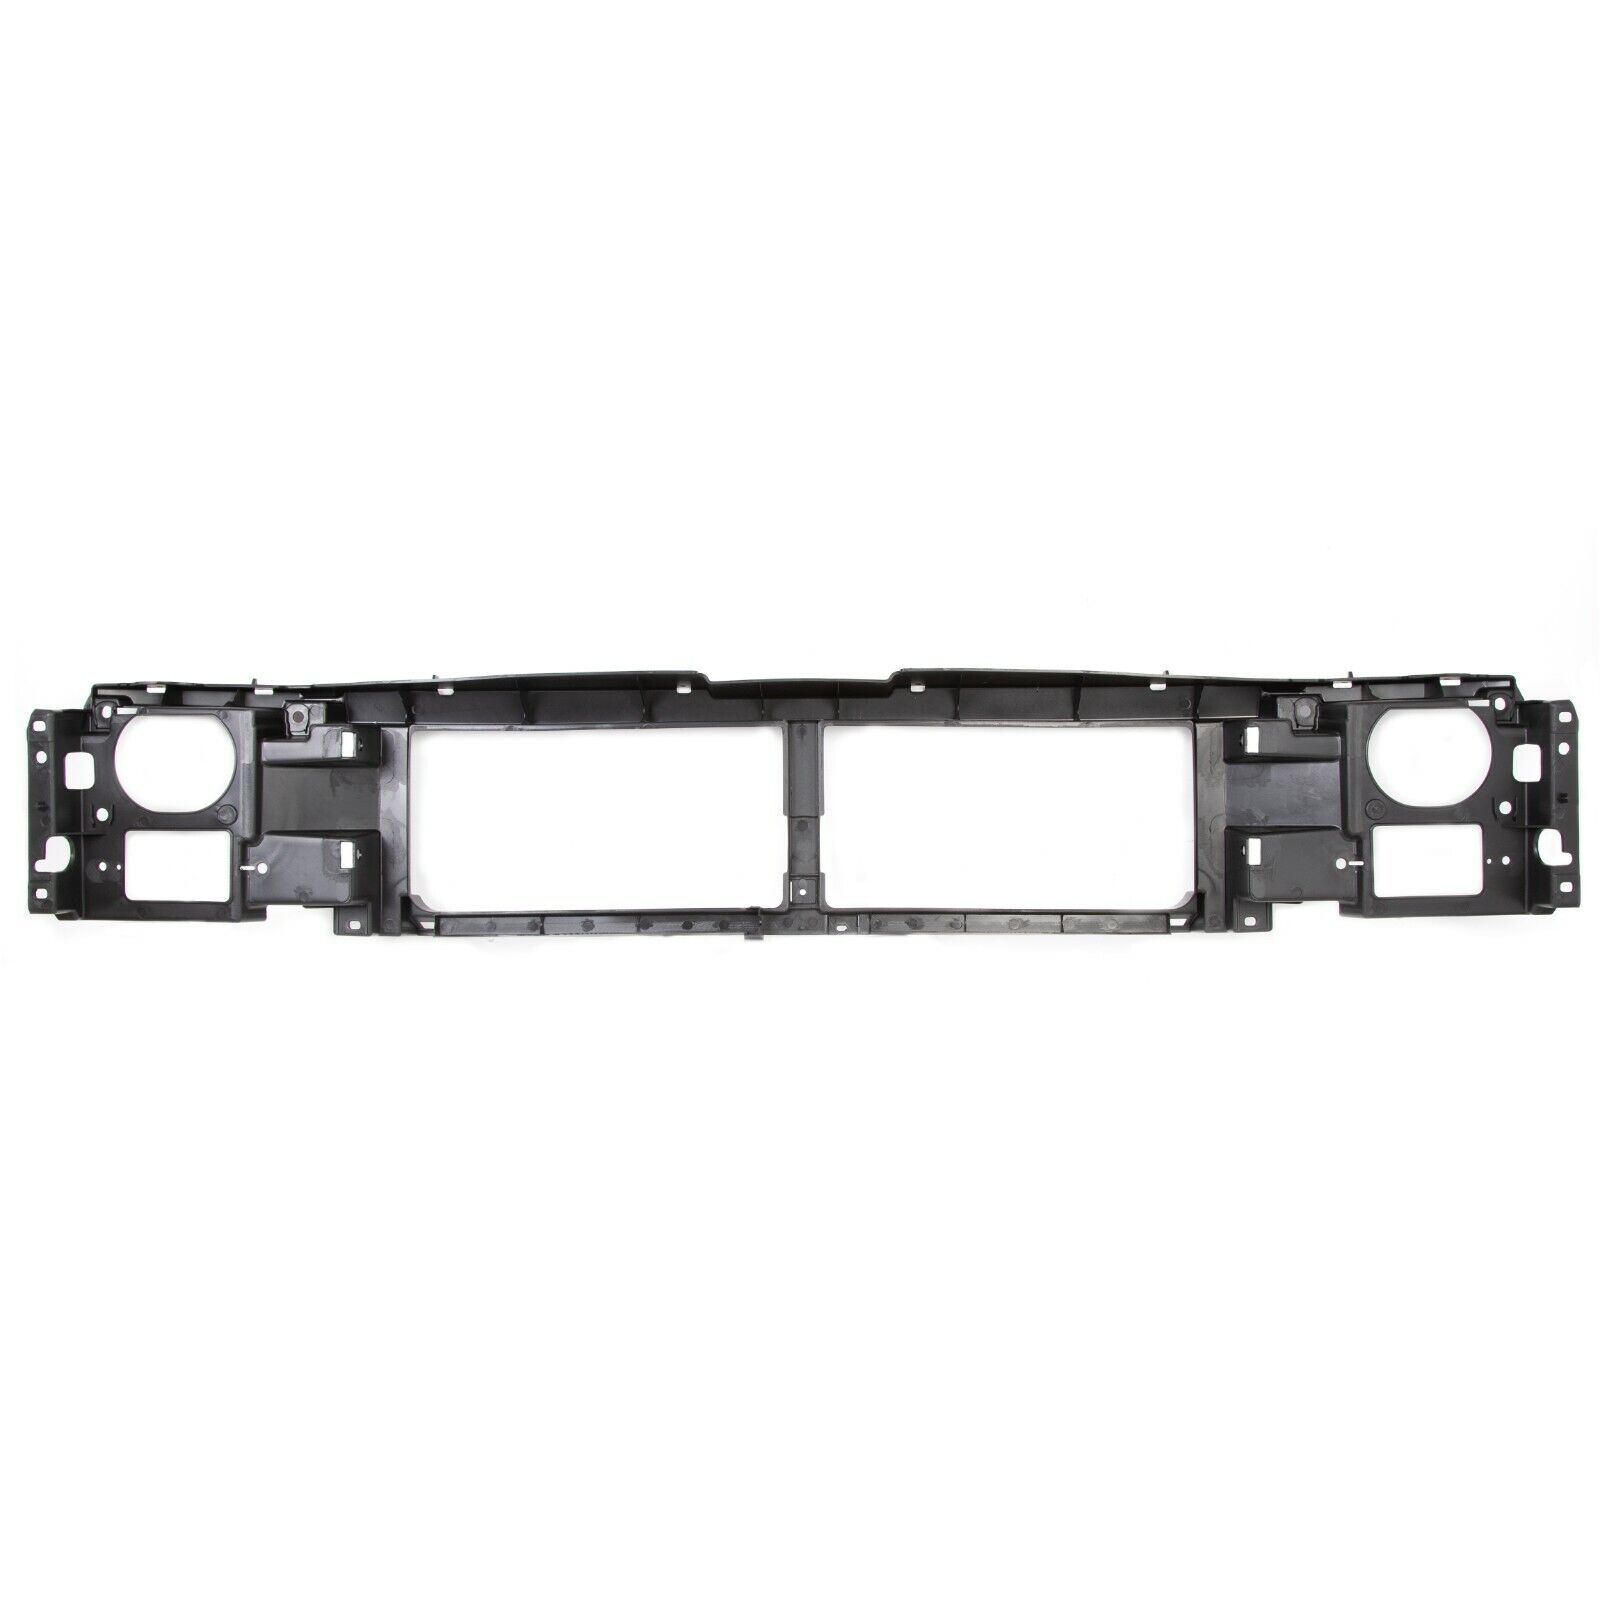 Header Panel For 92-97 Ford F-150 F-250 Grille Mount Panel Thermoplastic